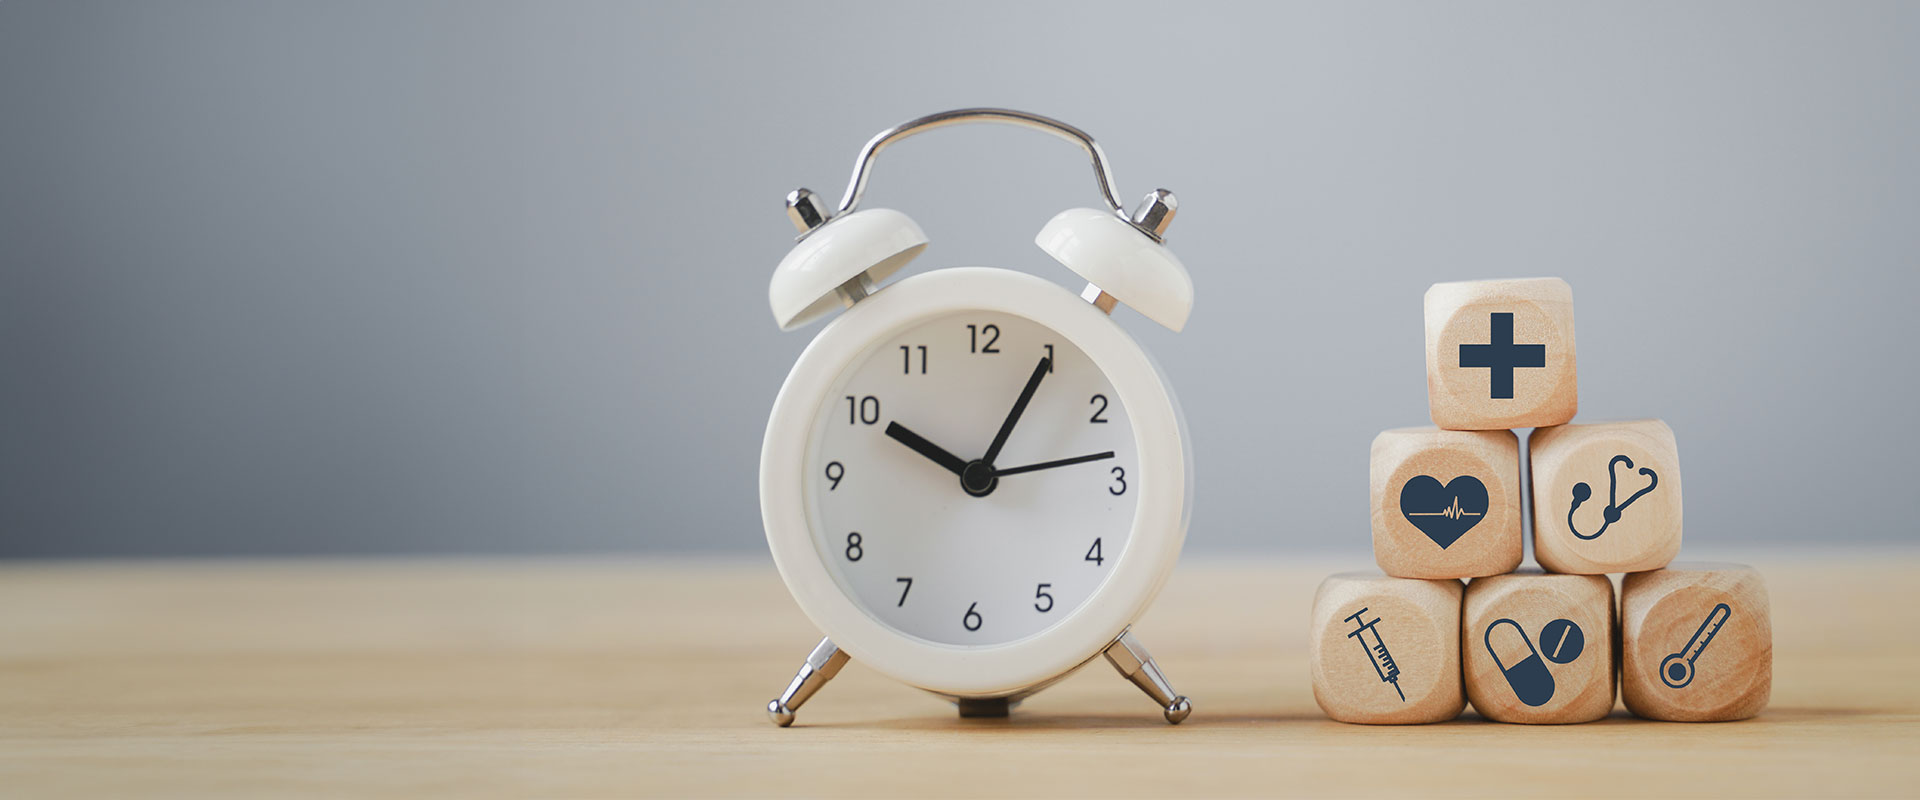 5 Top Time Management Tips for Caregivers